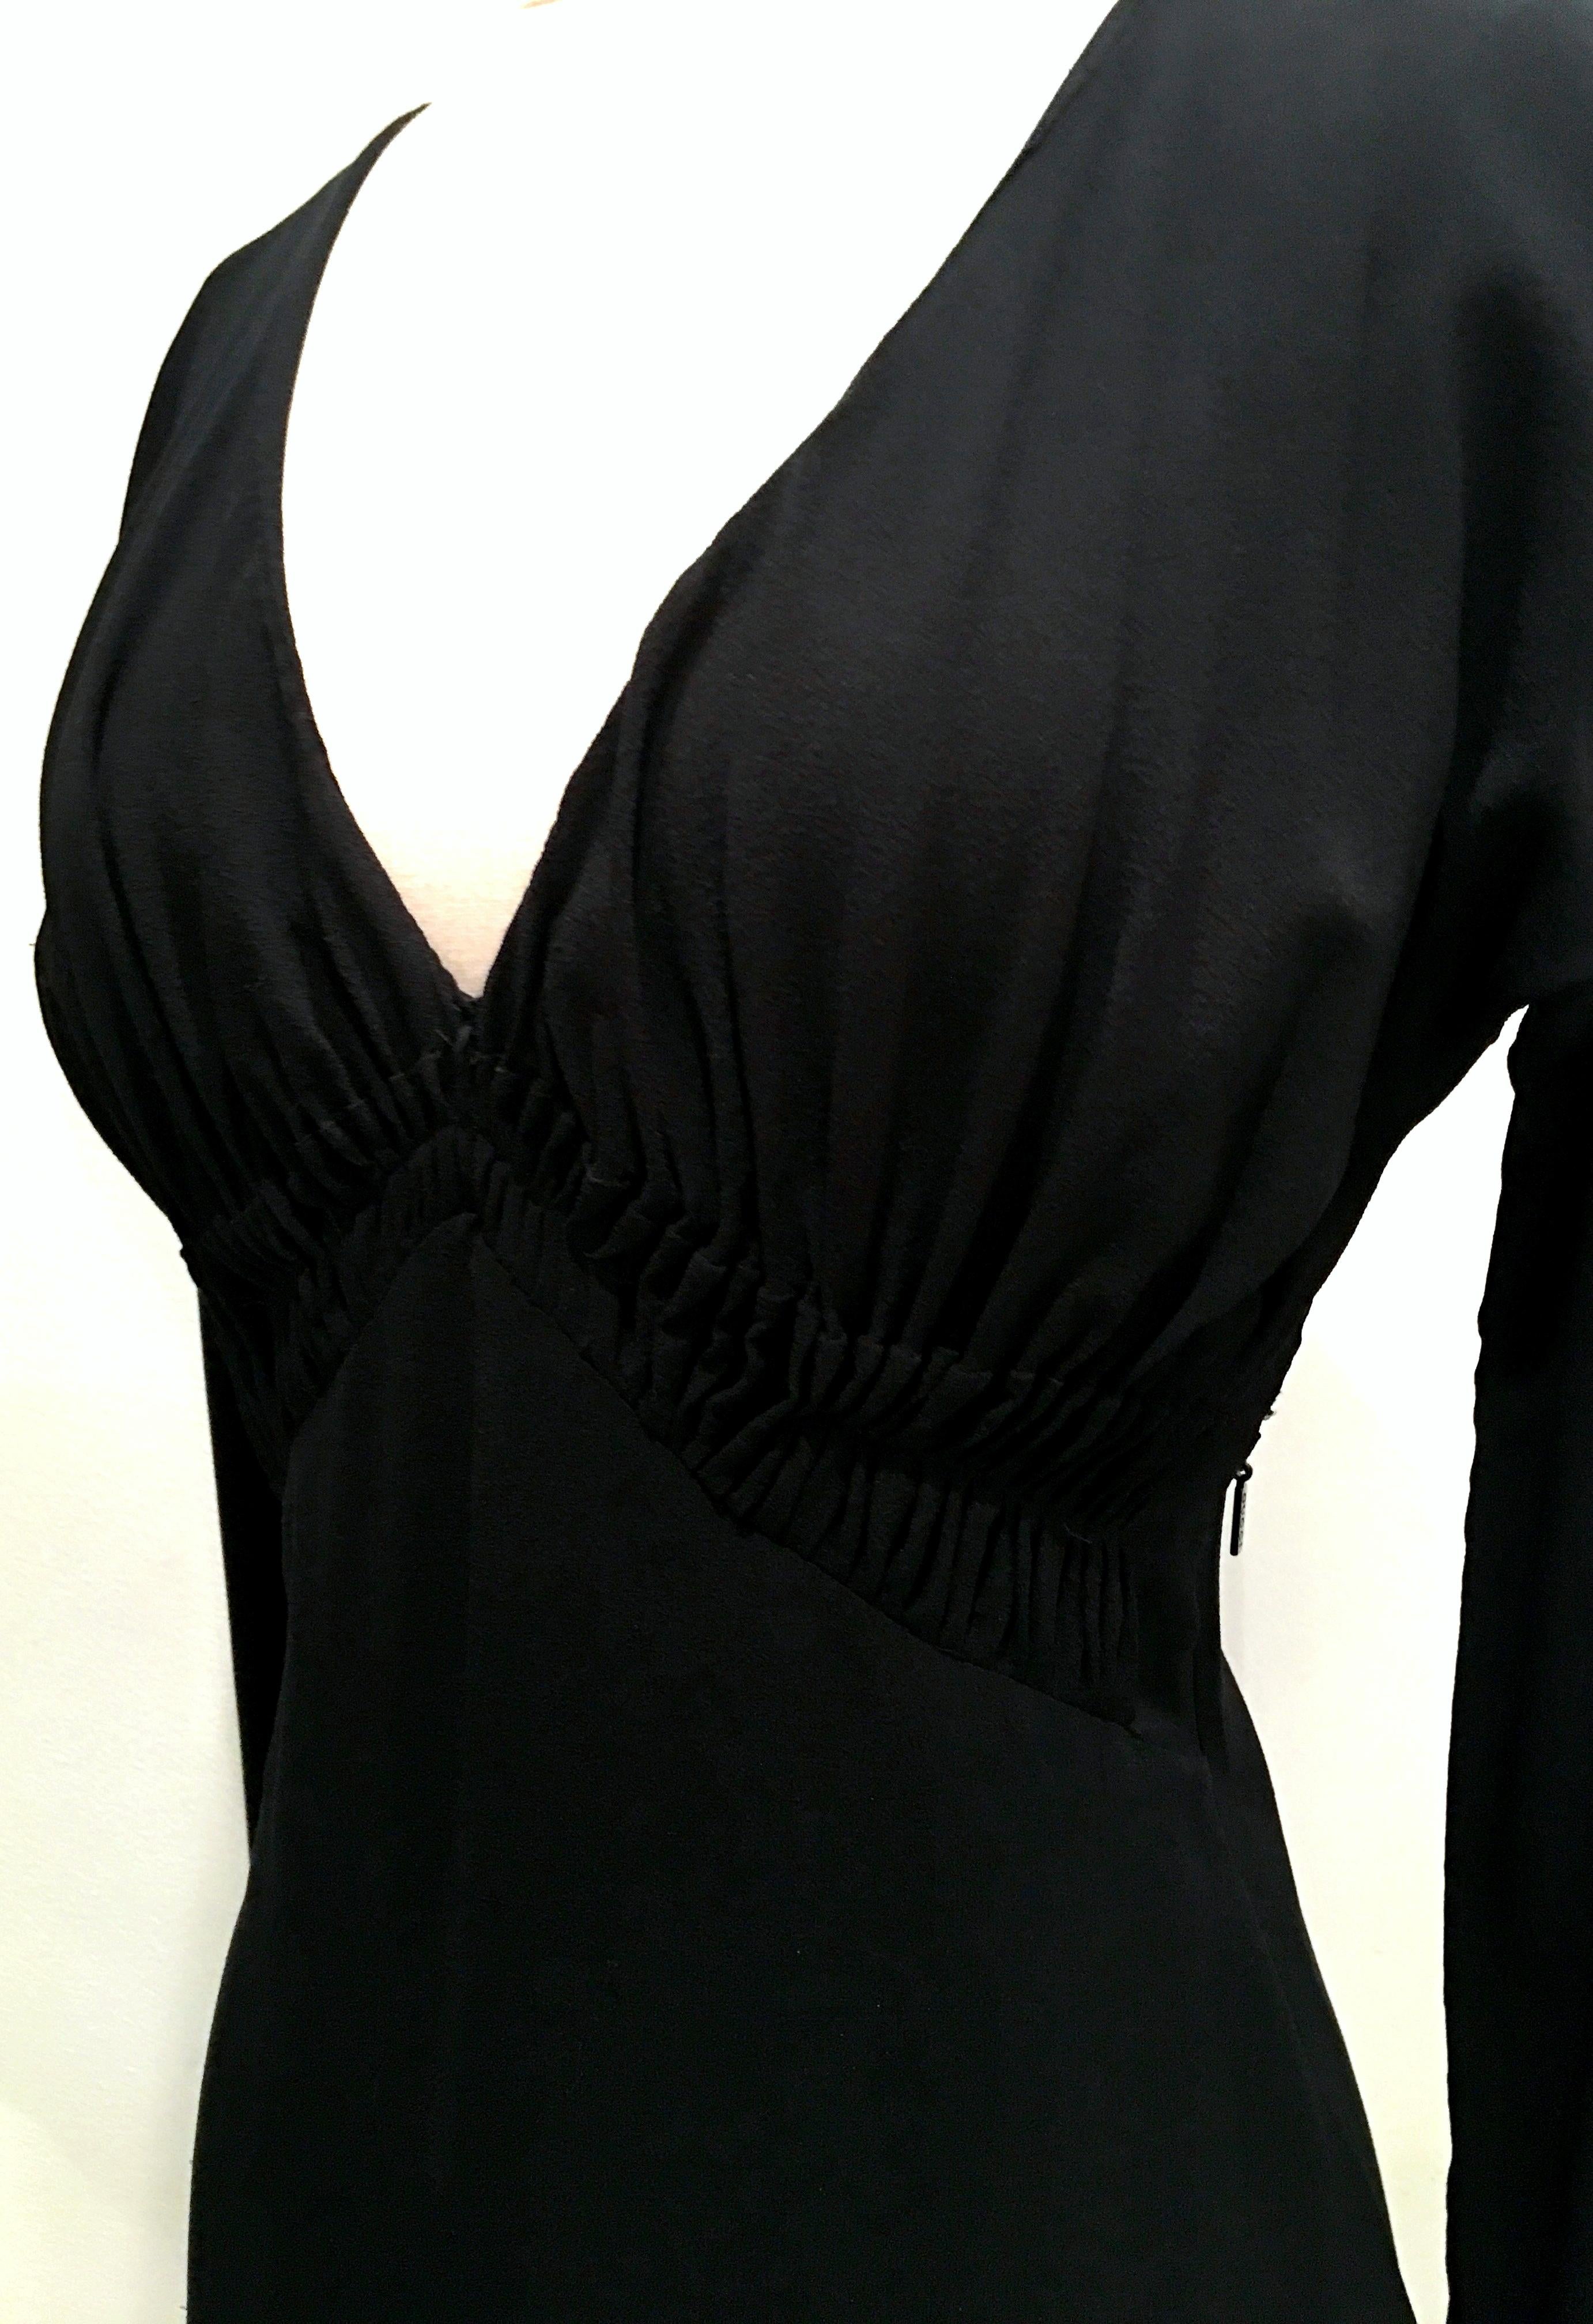 2003 Italian Silk Long Sleeve Deep Plunge Black Dress By Tom Ford For Gucci-42 For Sale 4